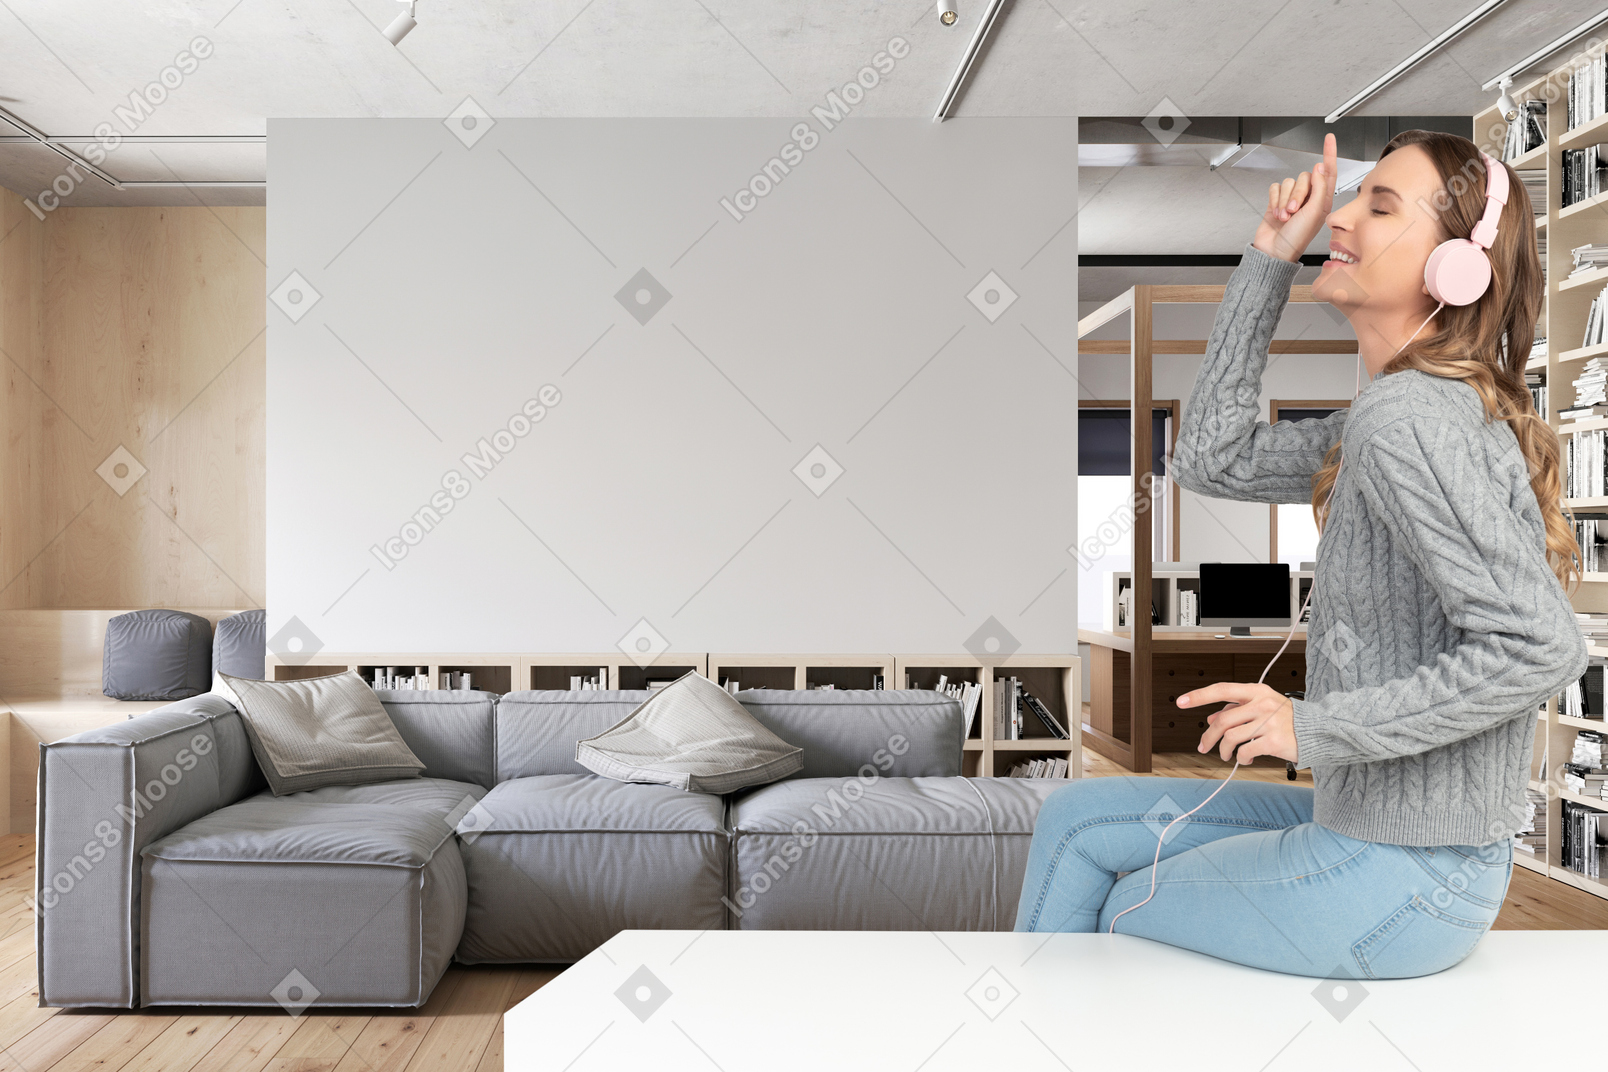 Woman with headphones listening to music in living room